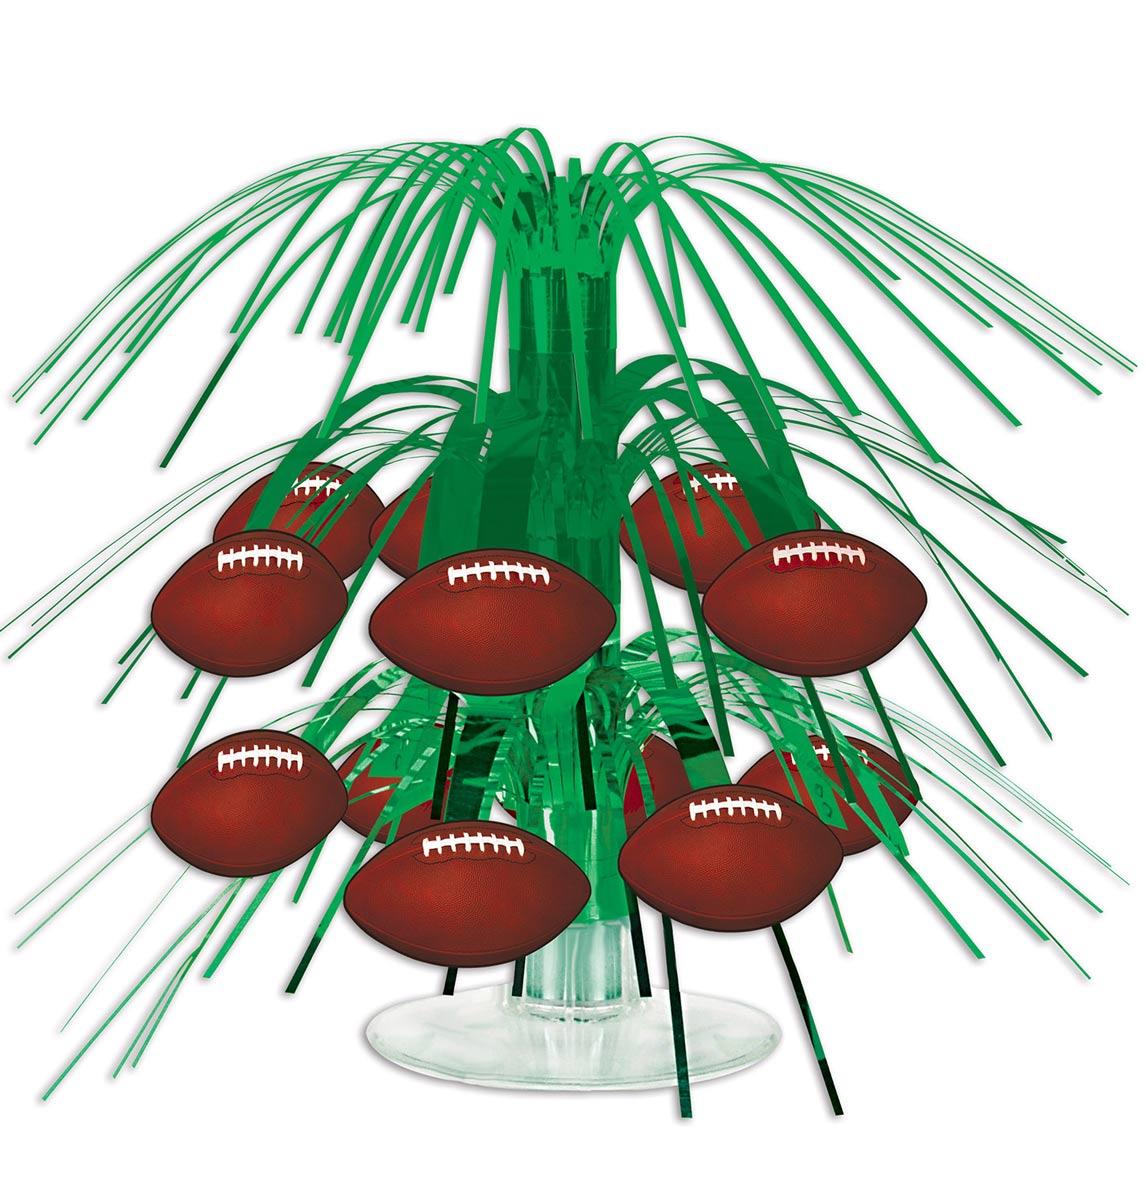 NFL American Football Party Cascade Table Centrepiece by Beistle 54104 available here at Karnival Costumes online party shop